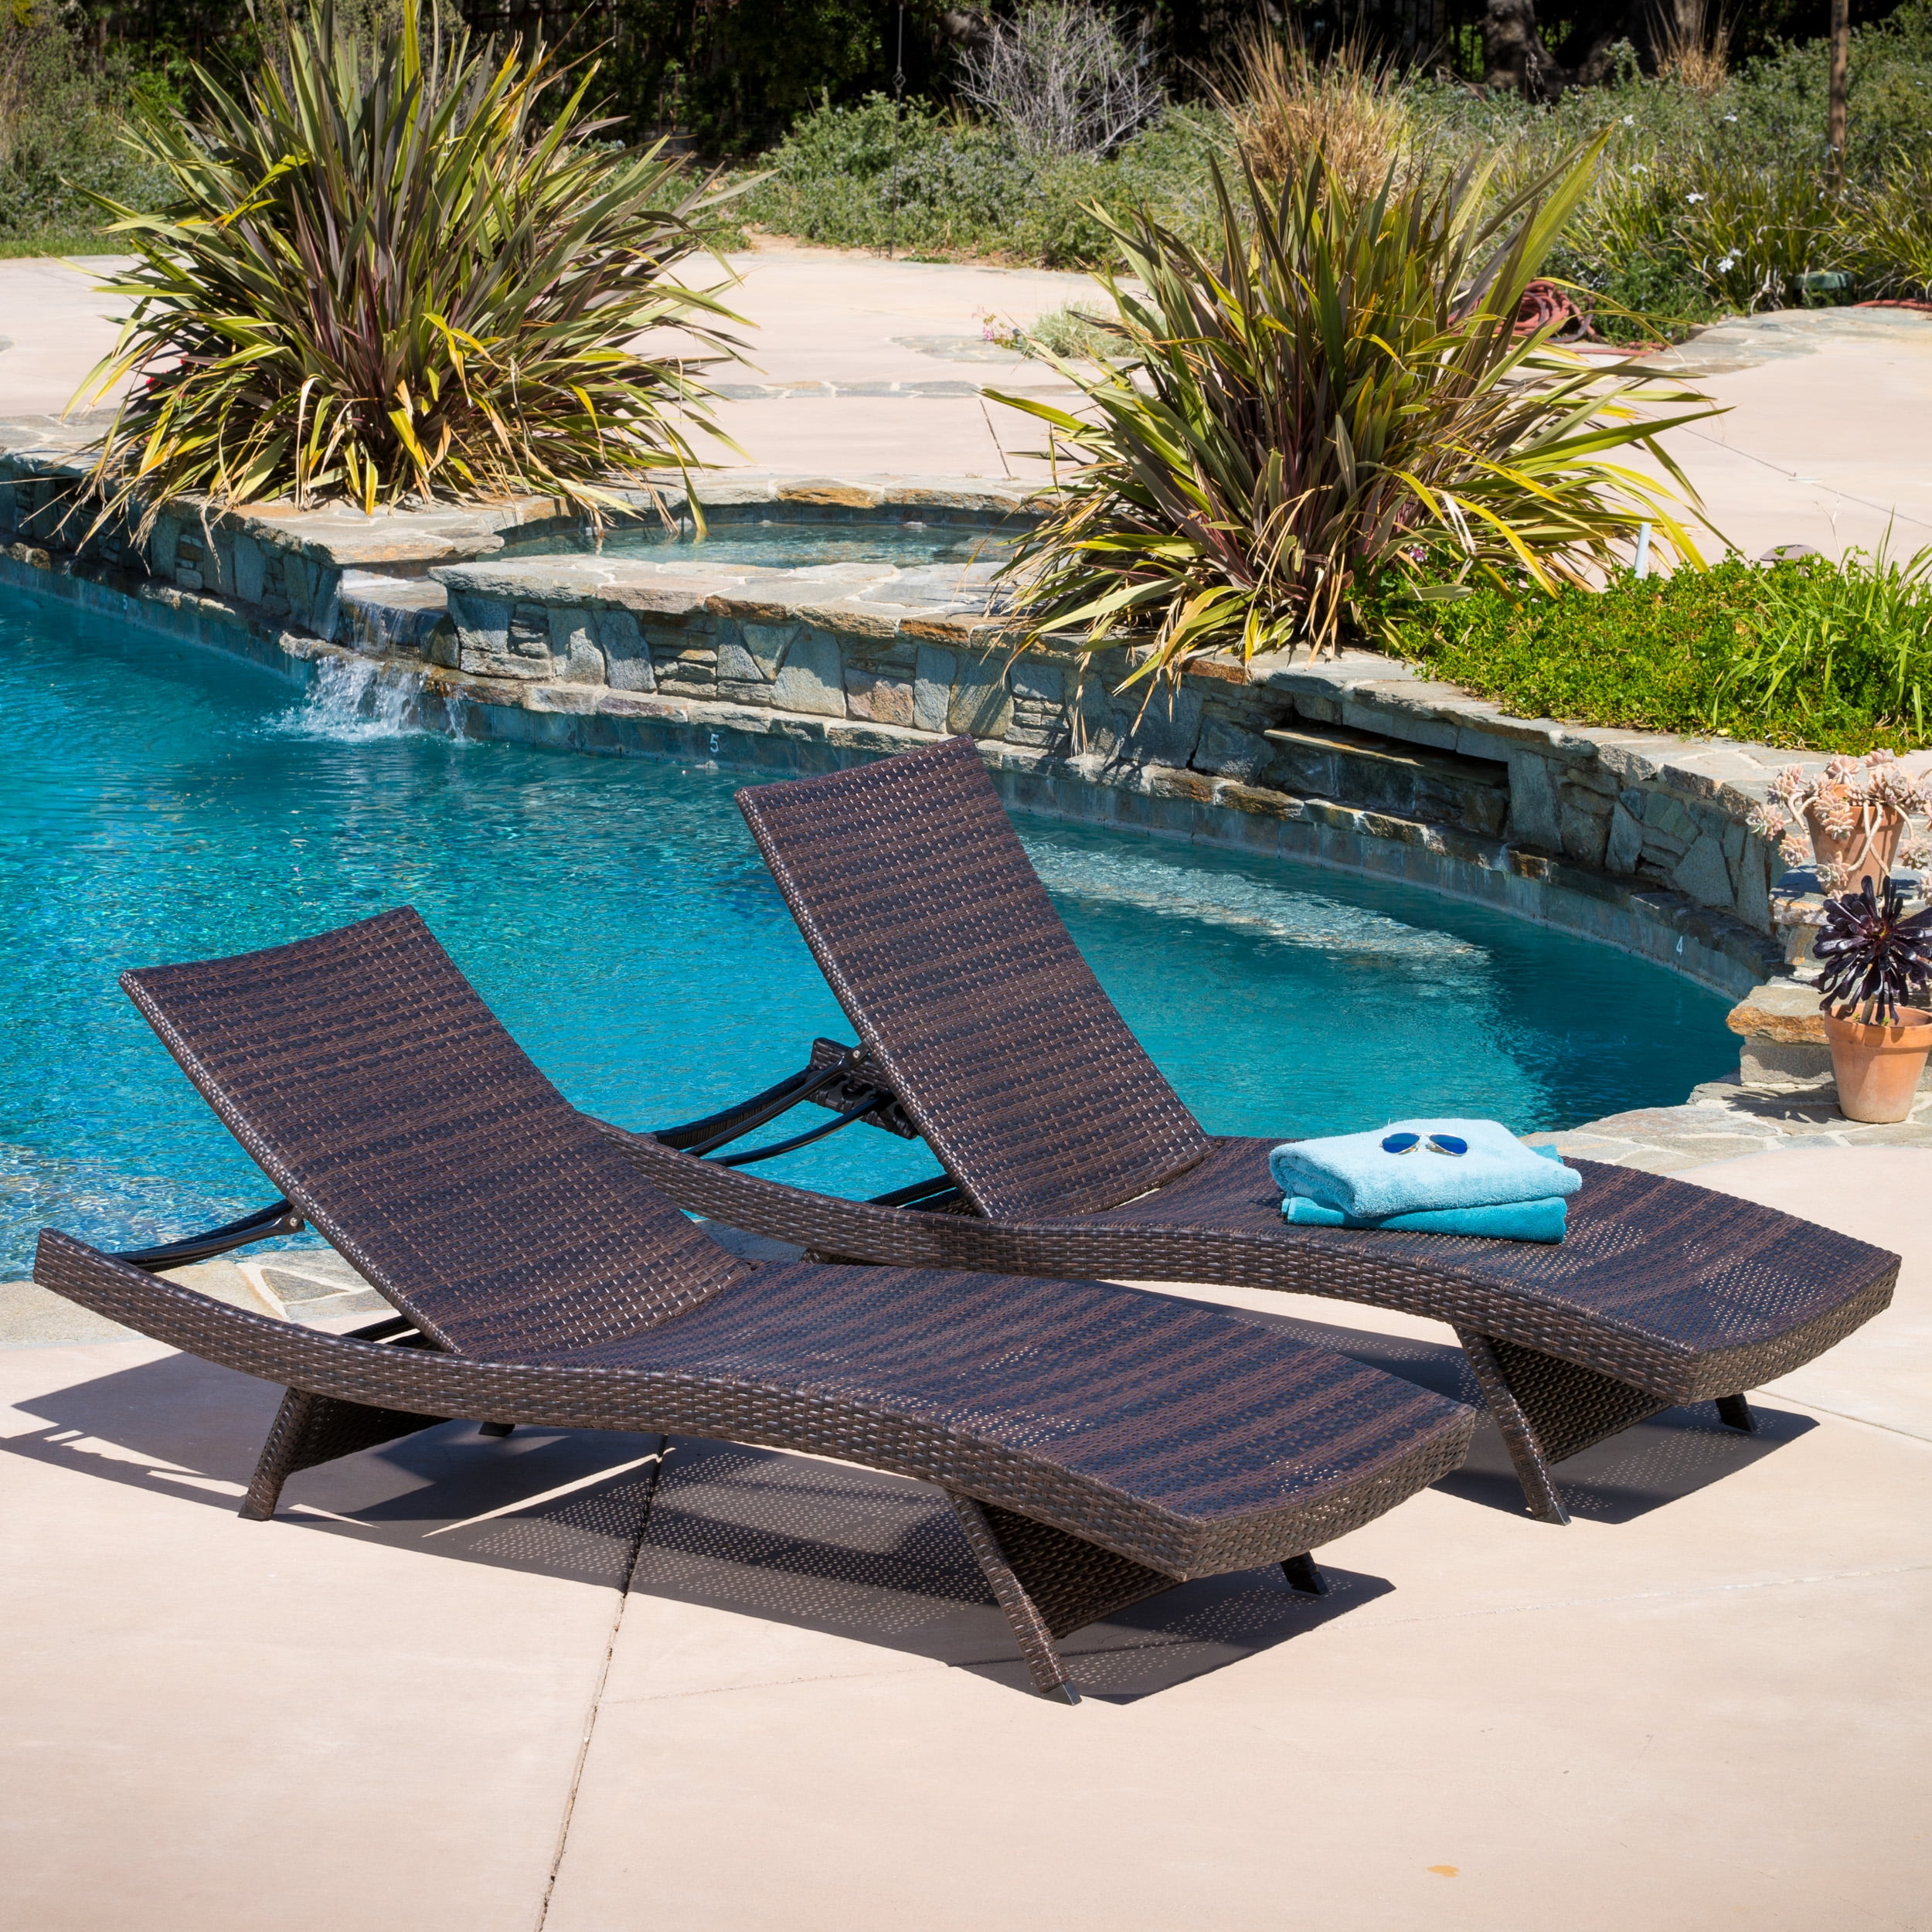 Stripe Seats 2 Mainstays Double Chaise Lounger